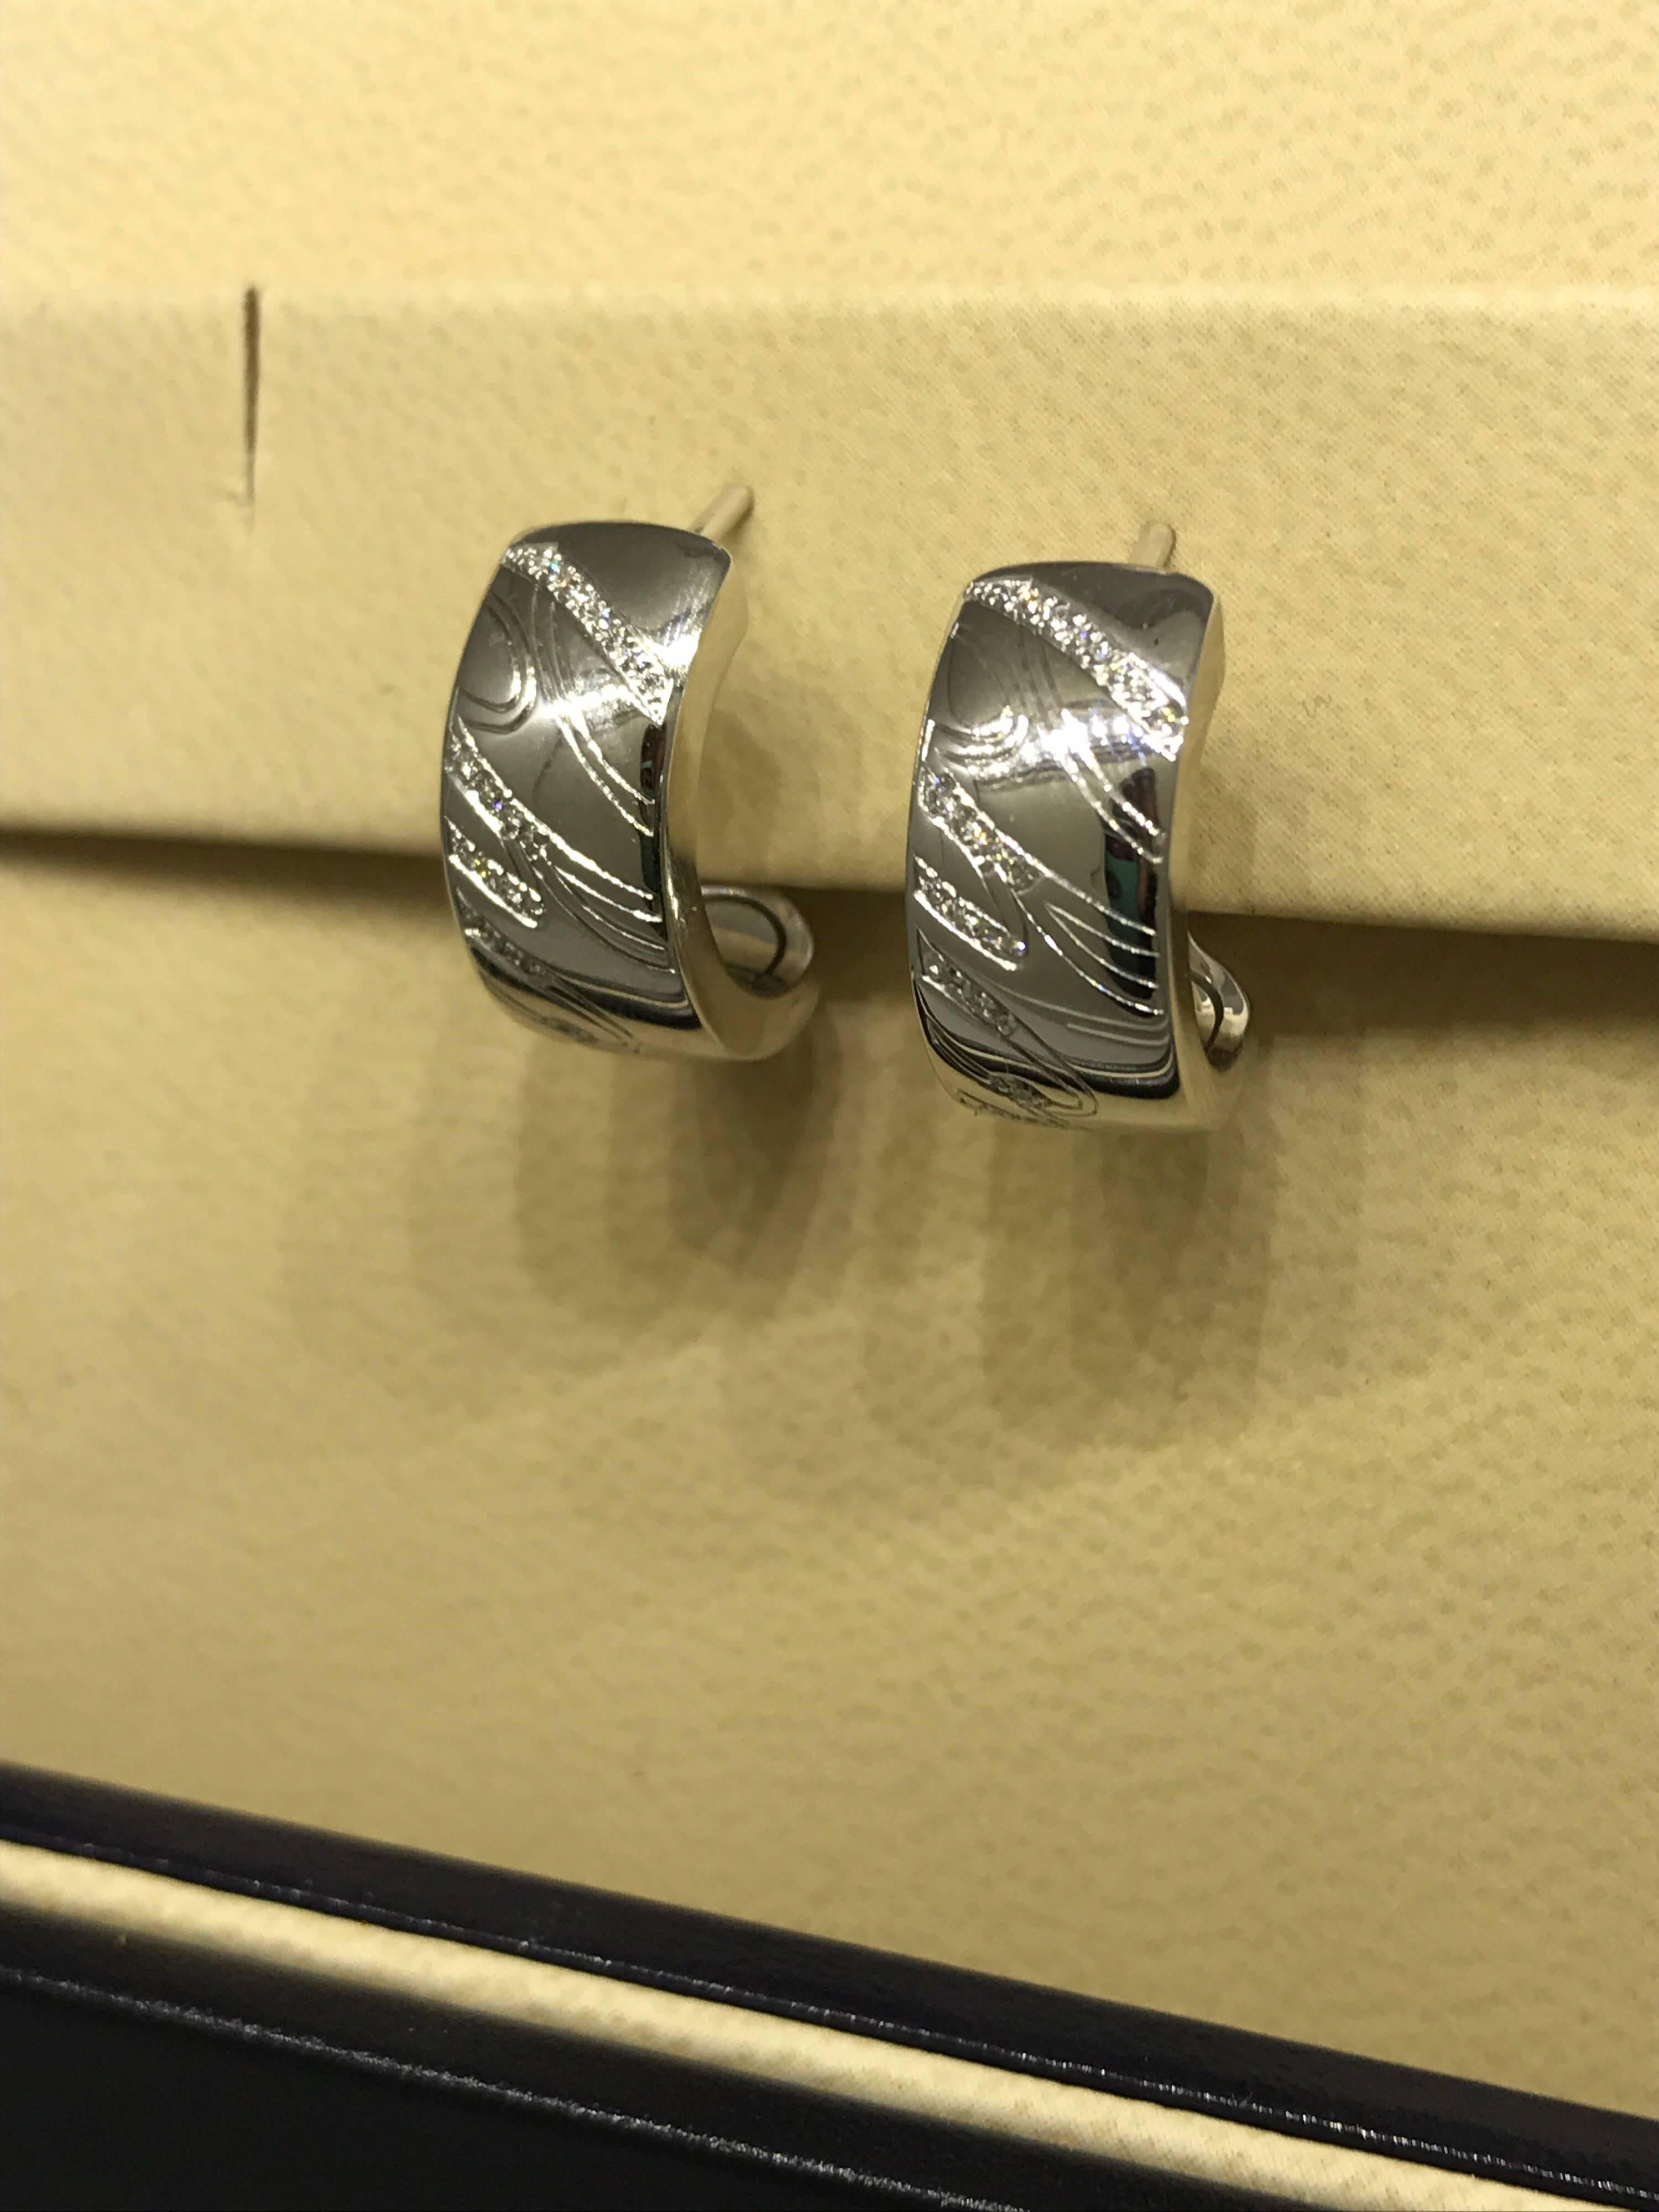 Chopard Chopardissimo 18 Karat White Gold and Diamond Earrings 83/7031-1002 In New Condition For Sale In New York, NY